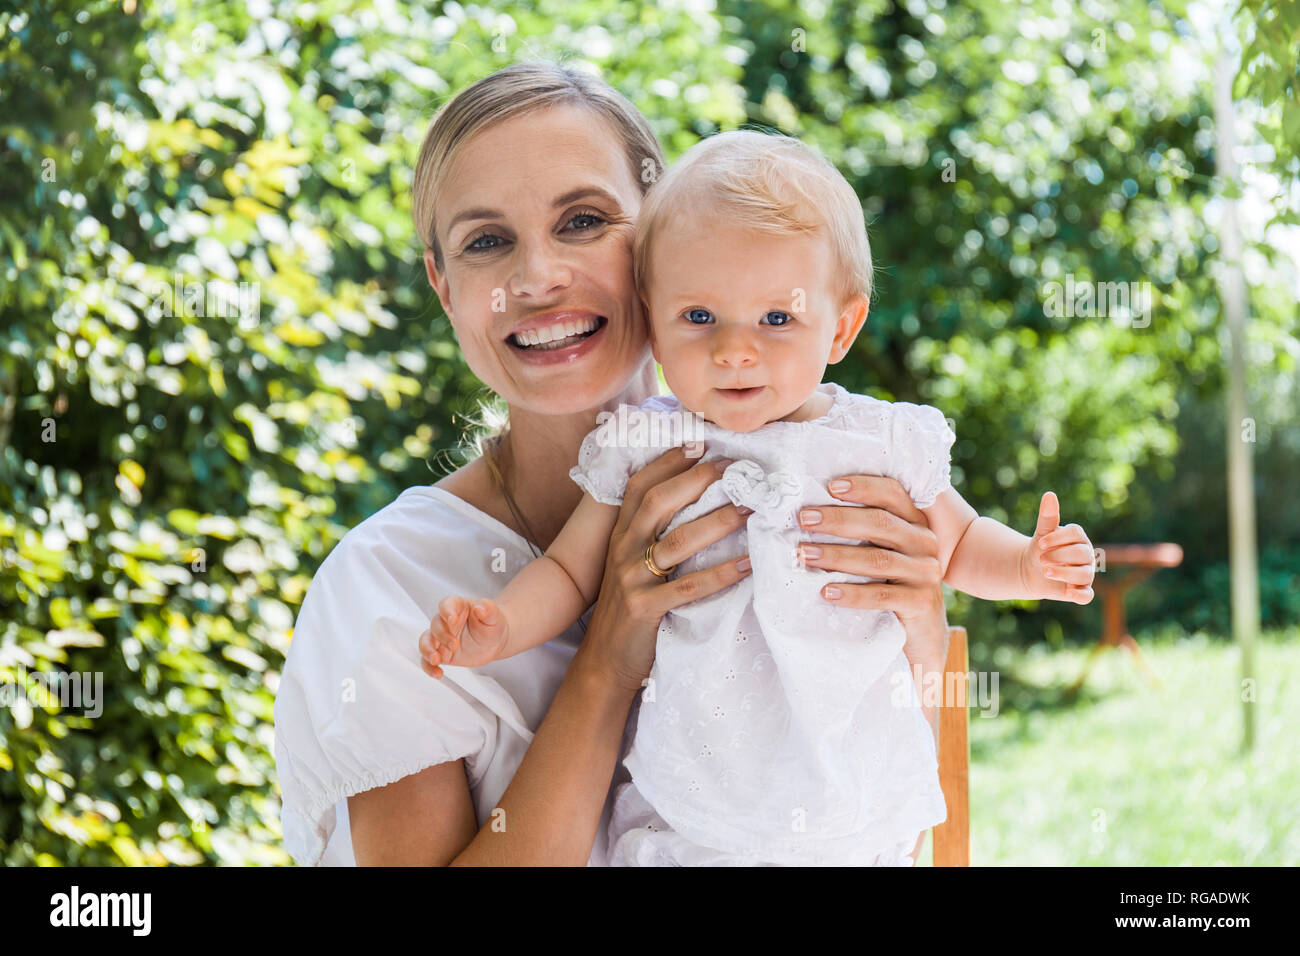 Portrait of happy mother holding her baby girl outdoors Stock Photo